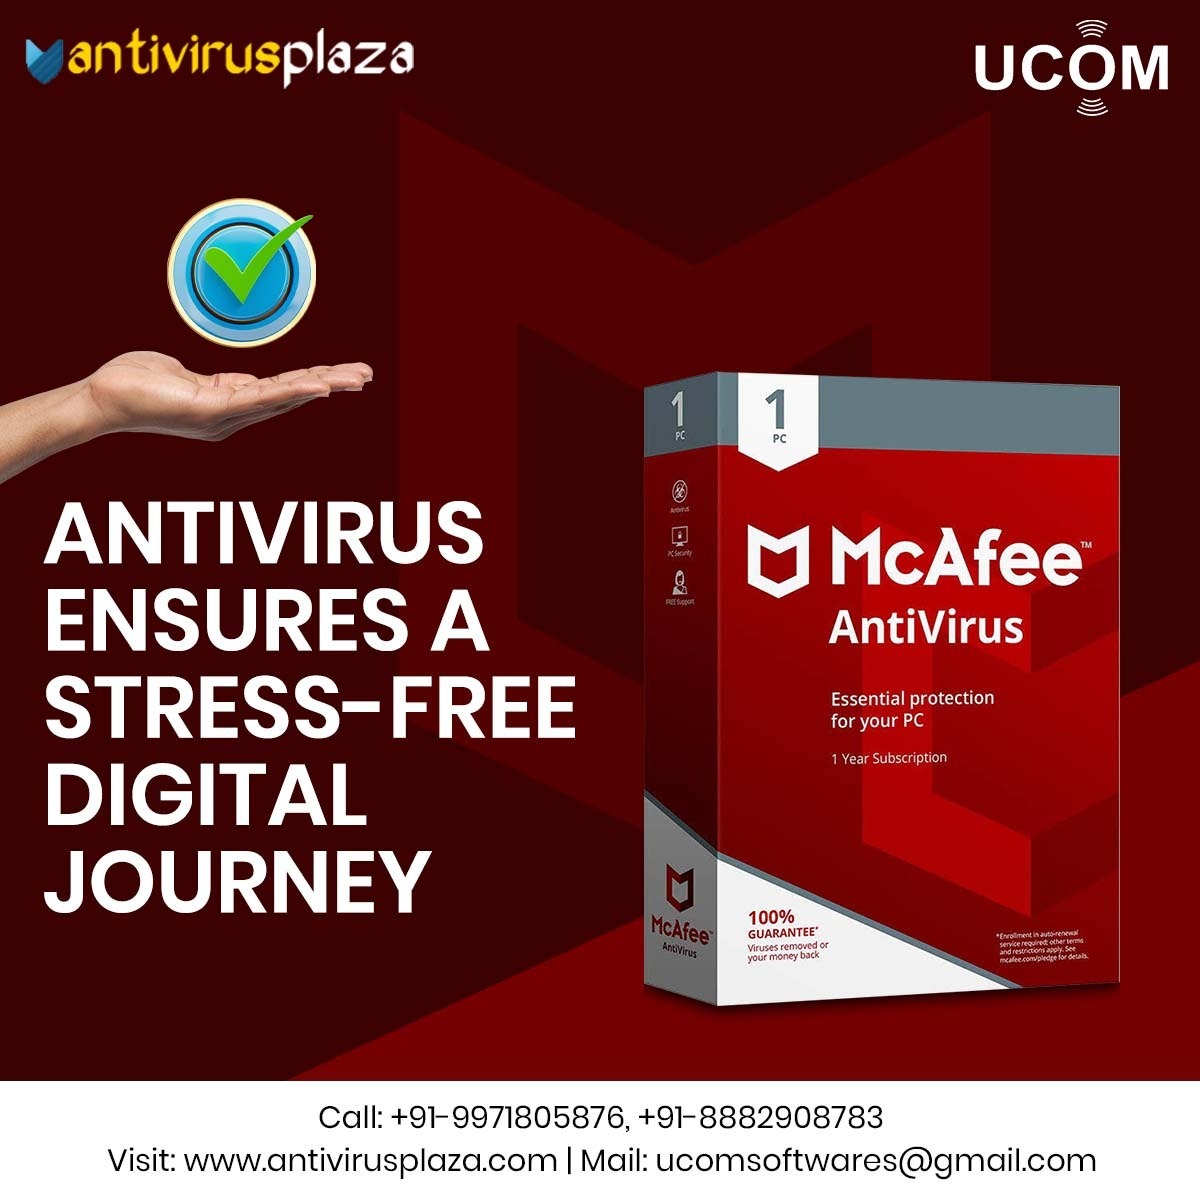 Antivirus ensures a stress-free digital journey. Explore the web with confidence, knowing we've got your back. 

𝐂𝐚𝐥𝐥: +91-99718 05876
𝐕𝐢𝐬𝐢𝐭 𝐔𝐬: antivirusplaza.com

#AntivirusPlaza #InternetSecurity #MobileSecurity #OnlineProtection #StaySafeOnline #software